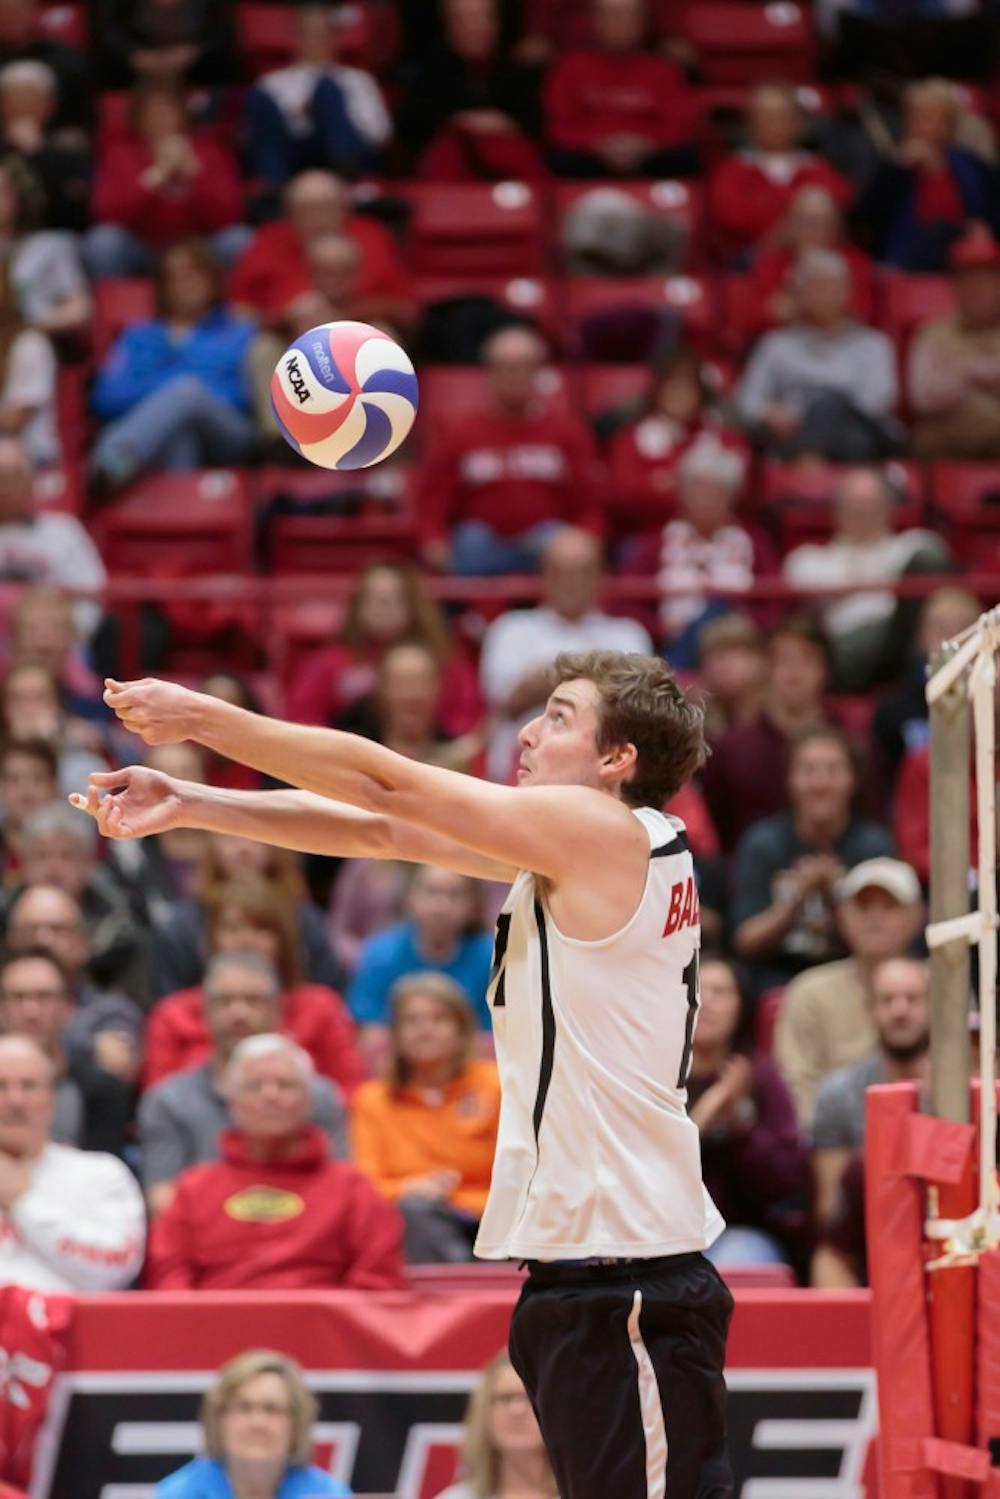 PREVIEW: No. 11 Ball State men's volleyball vs. Grand Canyon 